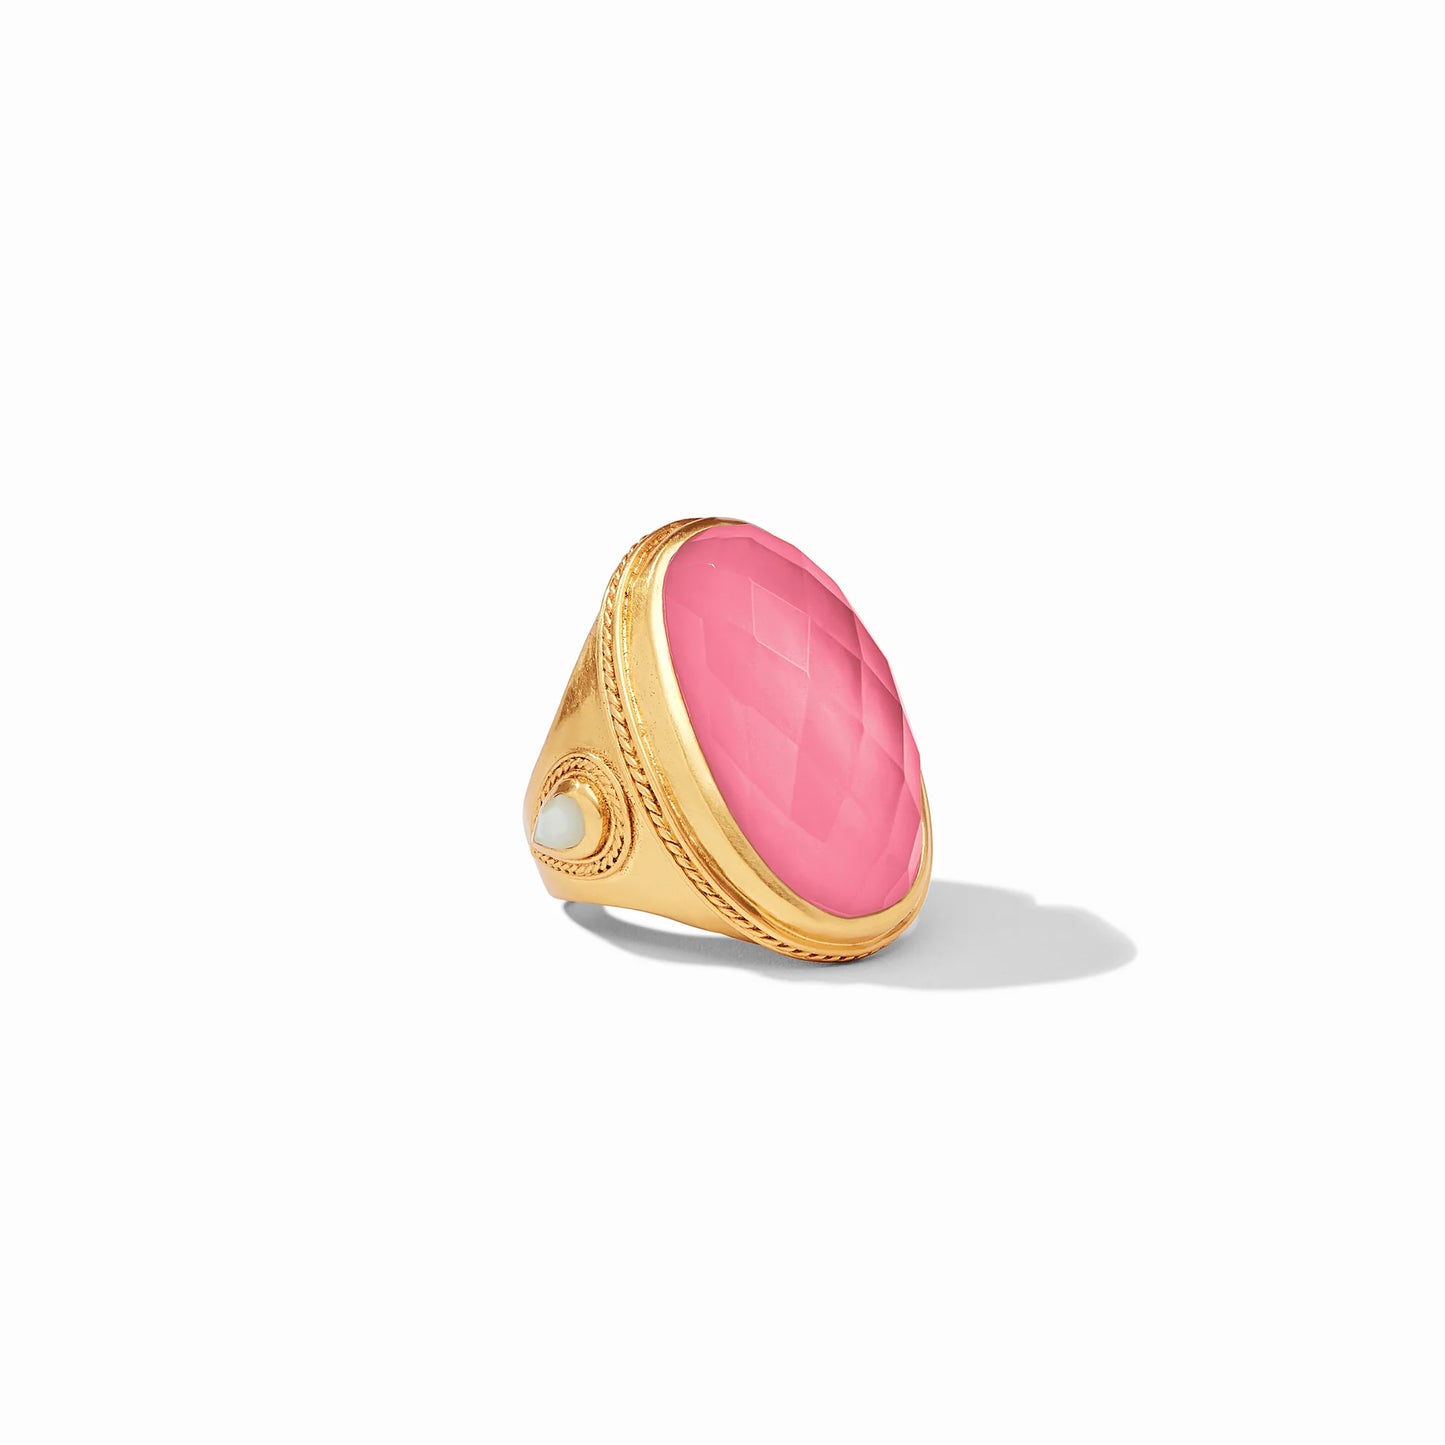 Julie Vos Cannes Statement Ring-Rings-Julie Vos-The Village Shoppe, Women’s Fashion Boutique, Shop Online and In Store - Located in Muscle Shoals, AL.